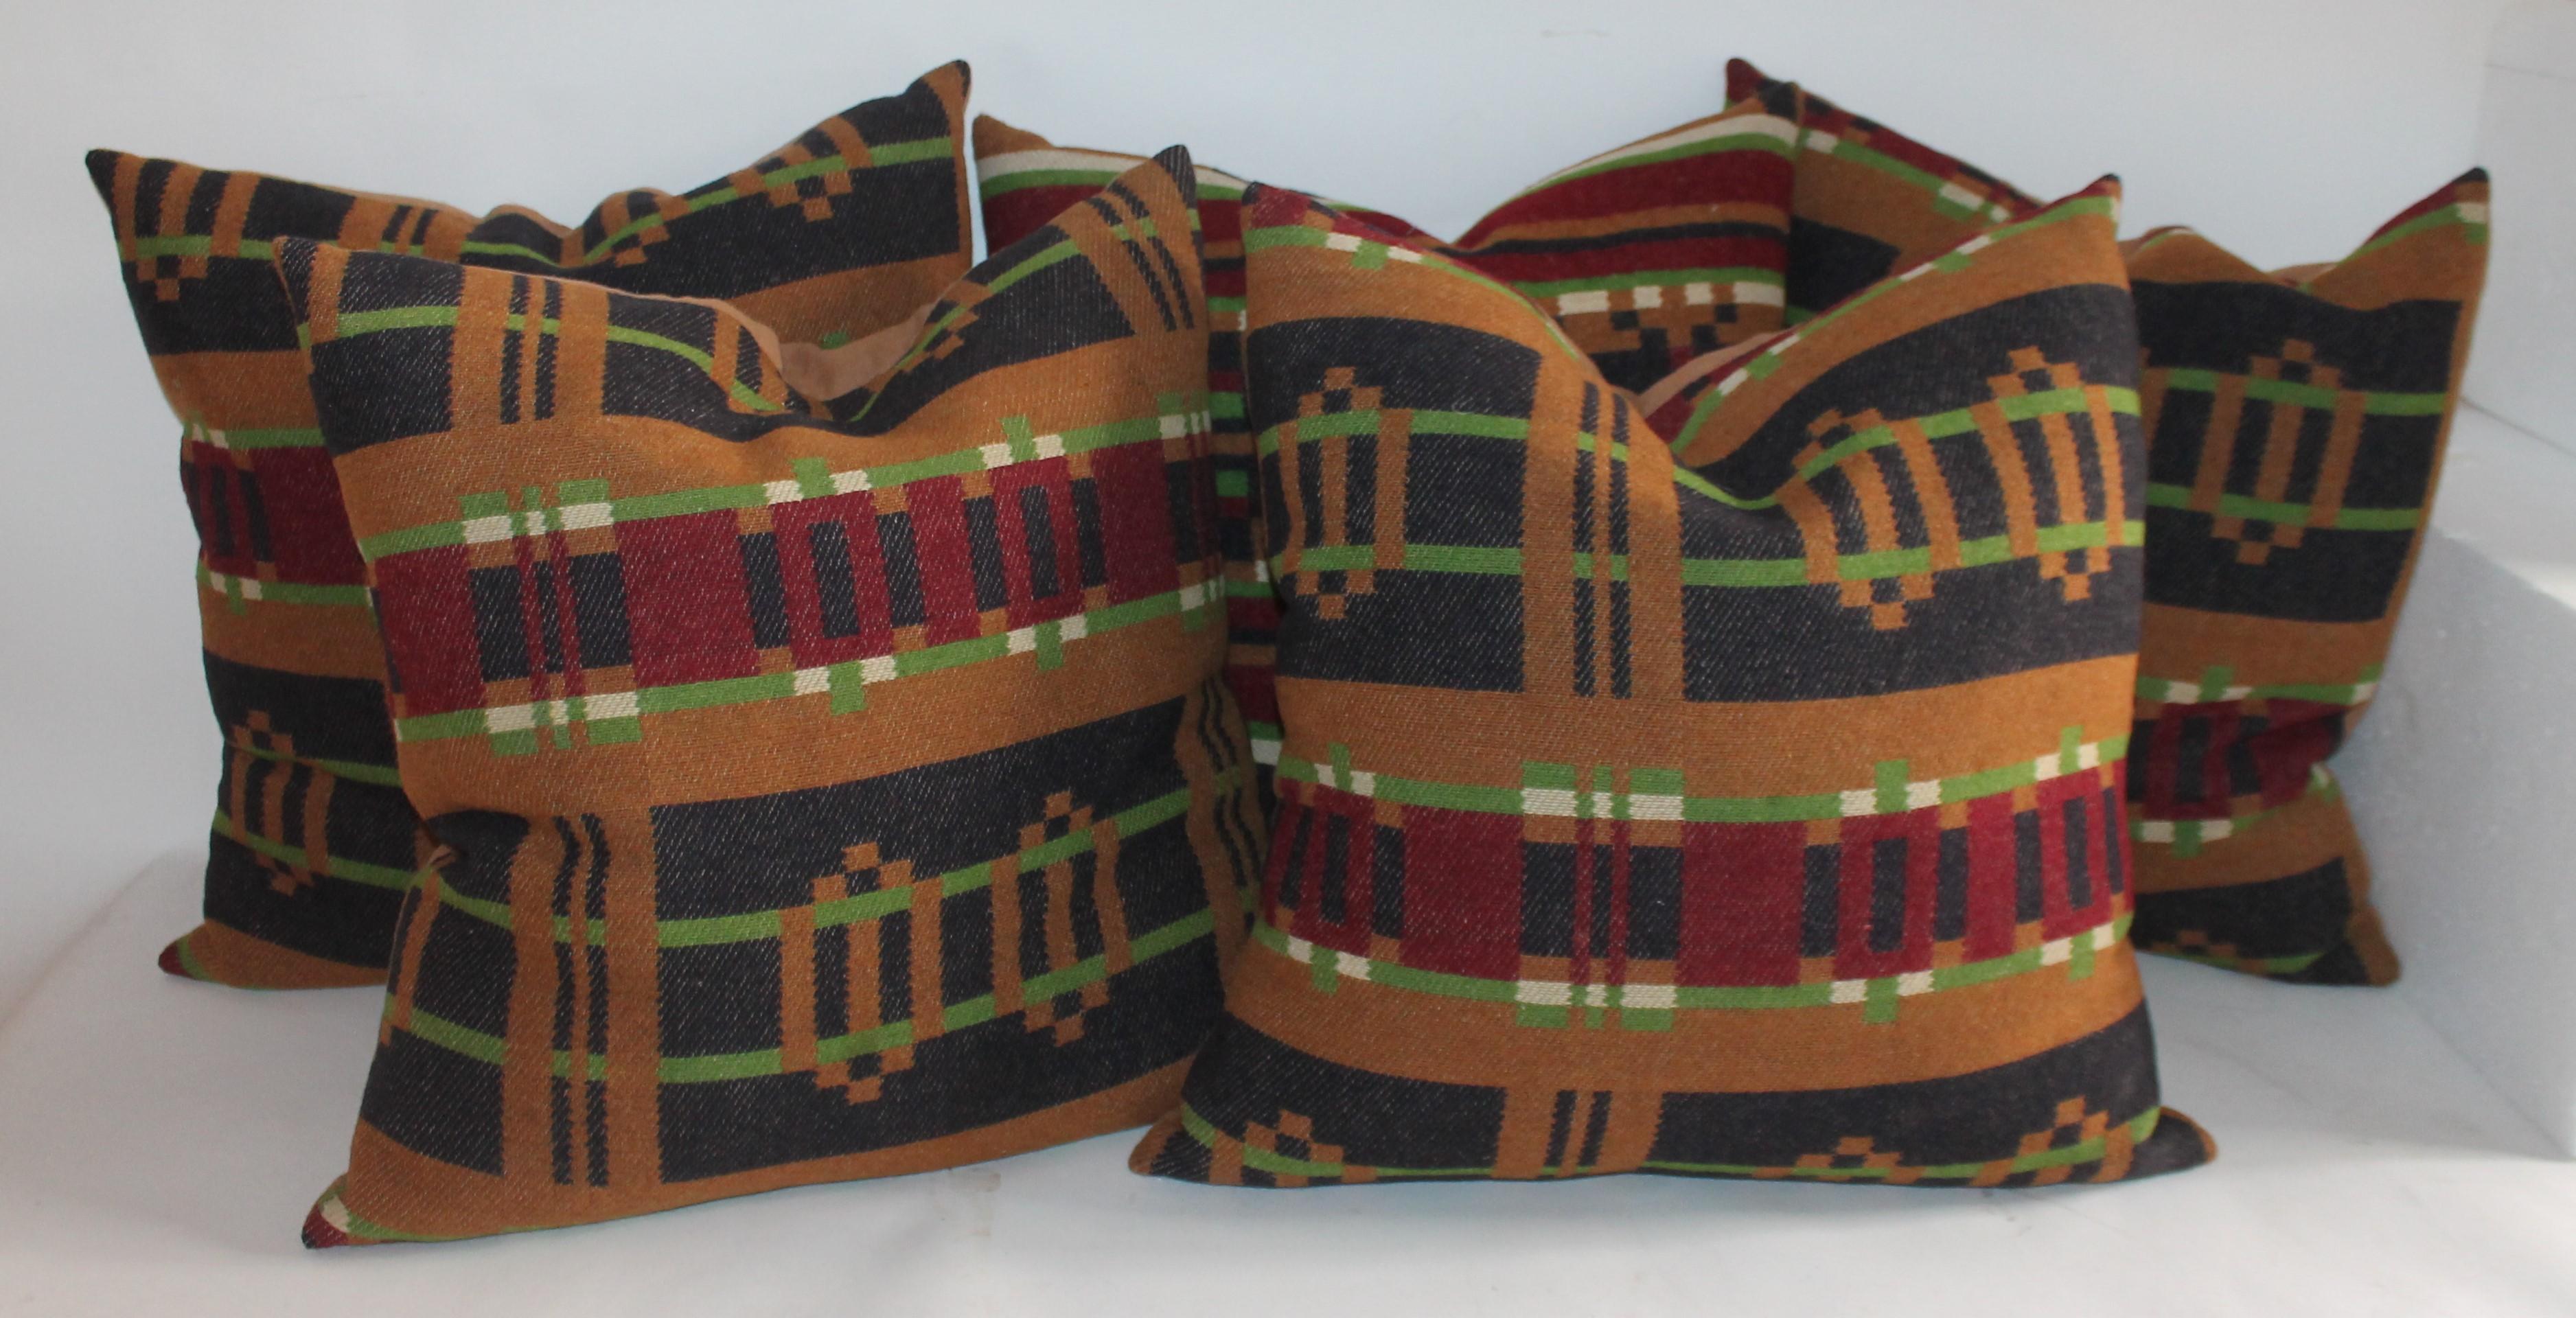 These fine 19th century horse blanket pillows are in fine condition and all have tobacco colored cotton linen backings. There are a total of five pillows in this collection. Fantastic colors and condition.